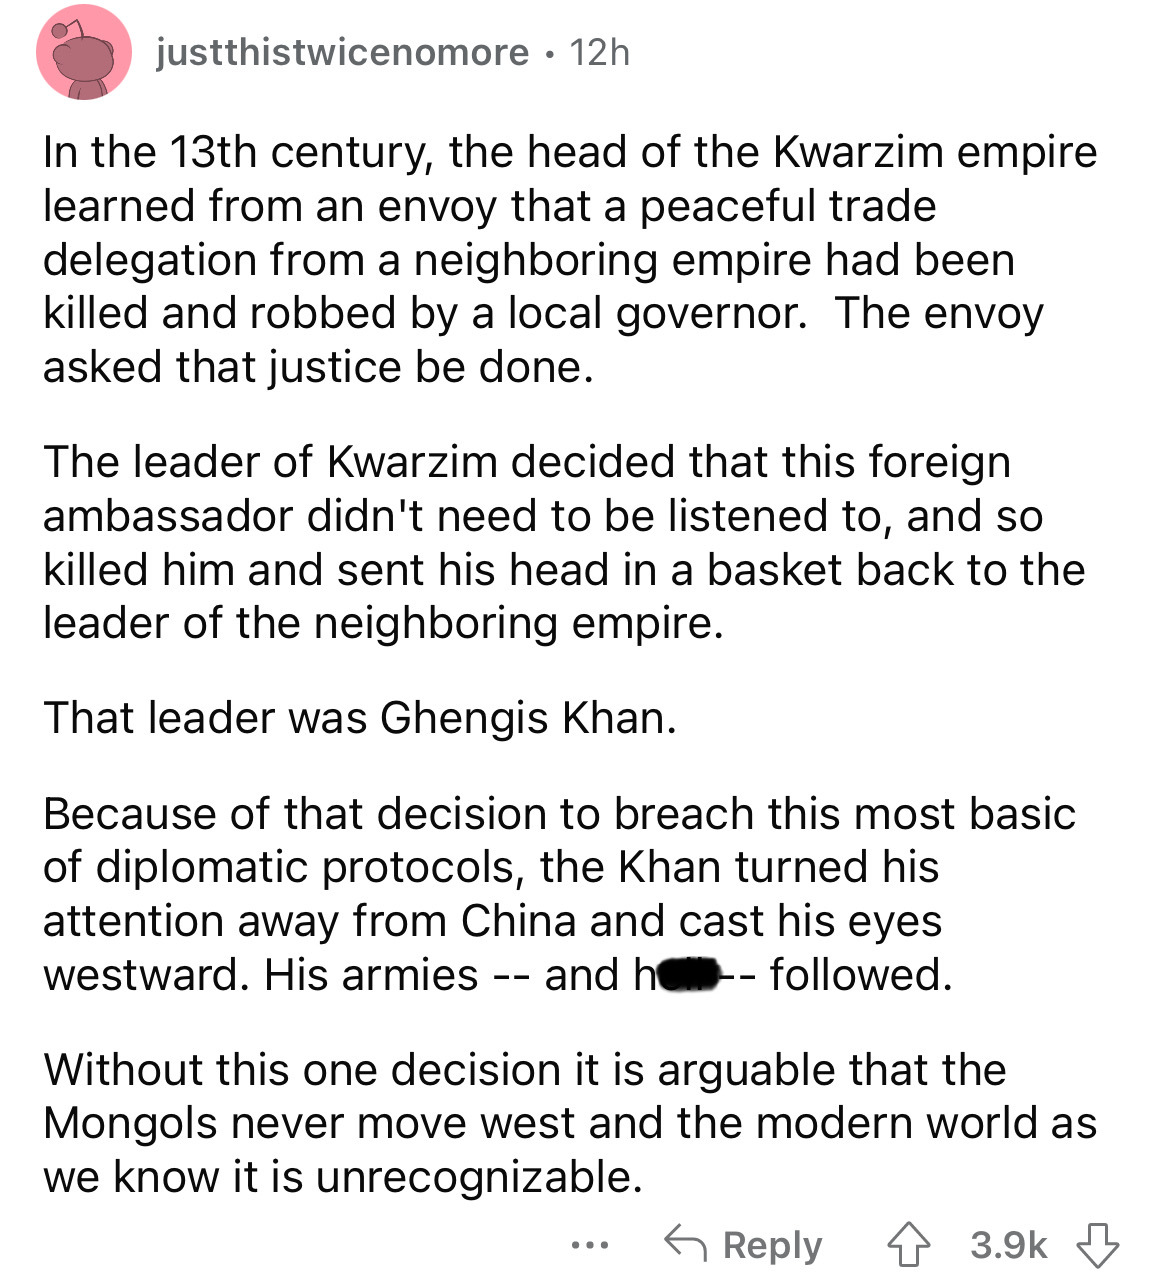 digital india article in english - justthistwicenomore 12h In the 13th century, the head of the Kwarzim empire learned from an envoy that a peaceful trade delegation from a neighboring empire had been killed and robbed by a local governor. The envoy asked